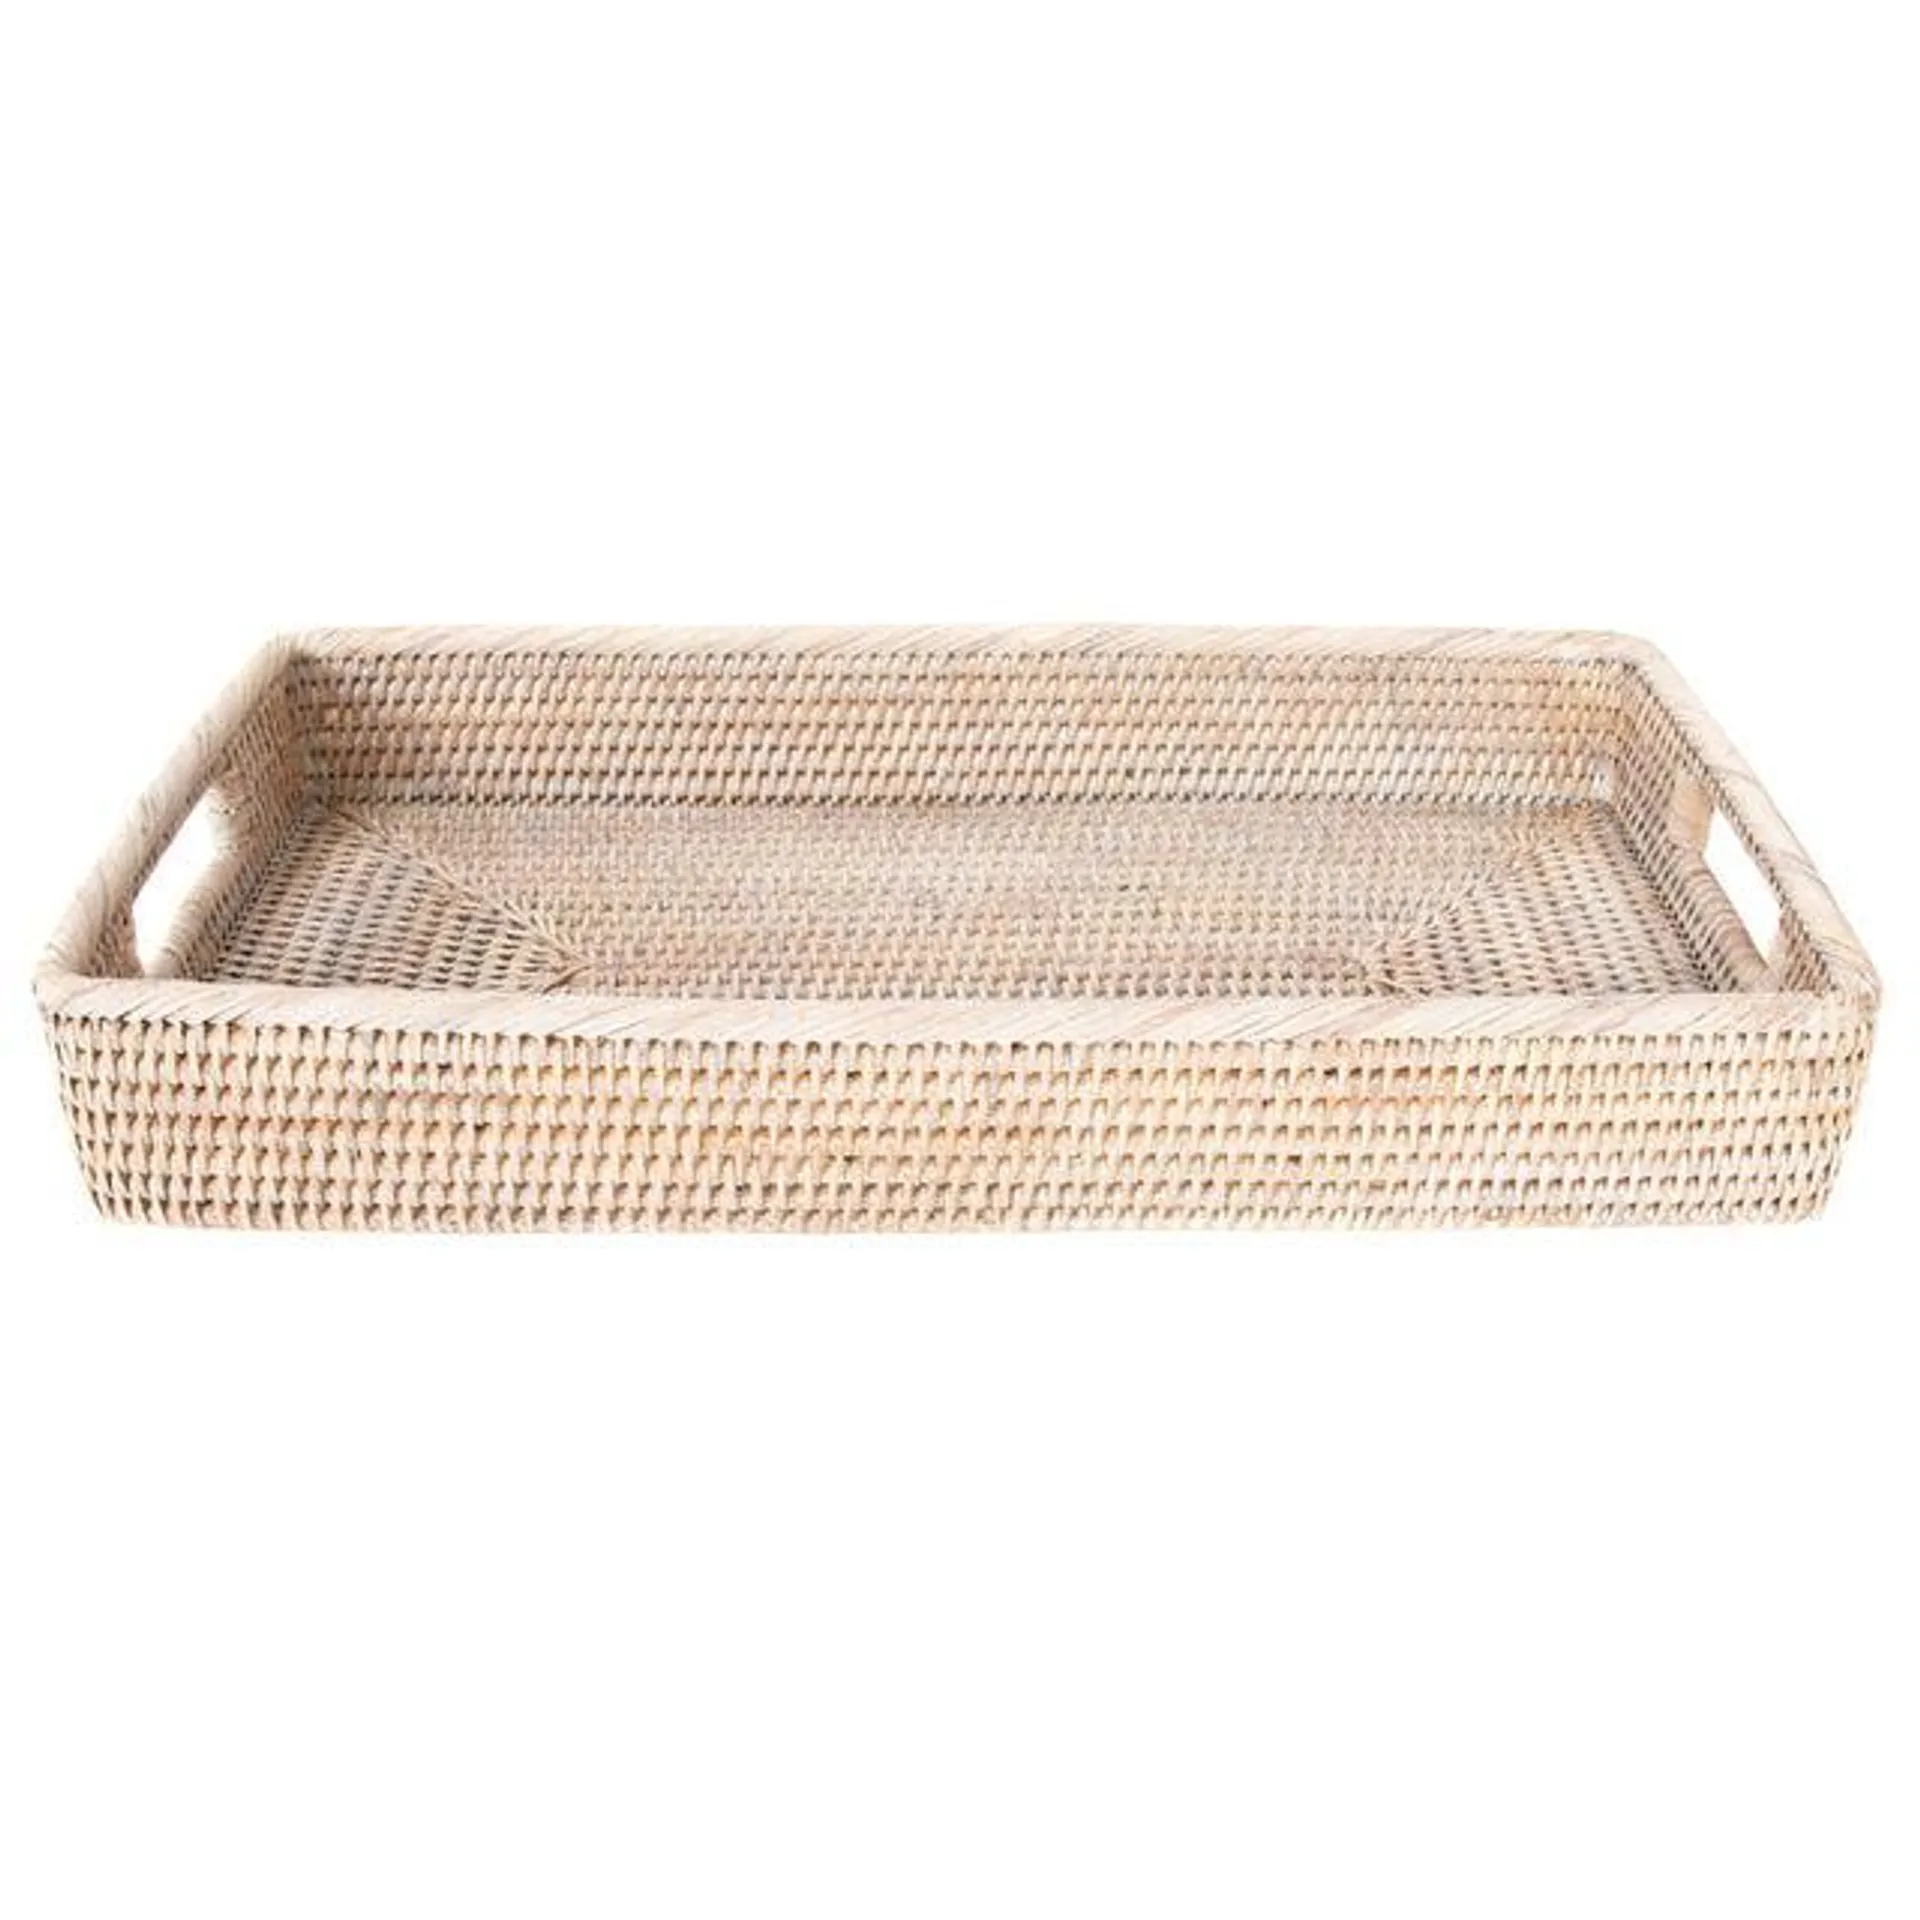 Artifacts Rattan Rectangular Tray with Rounded Corners